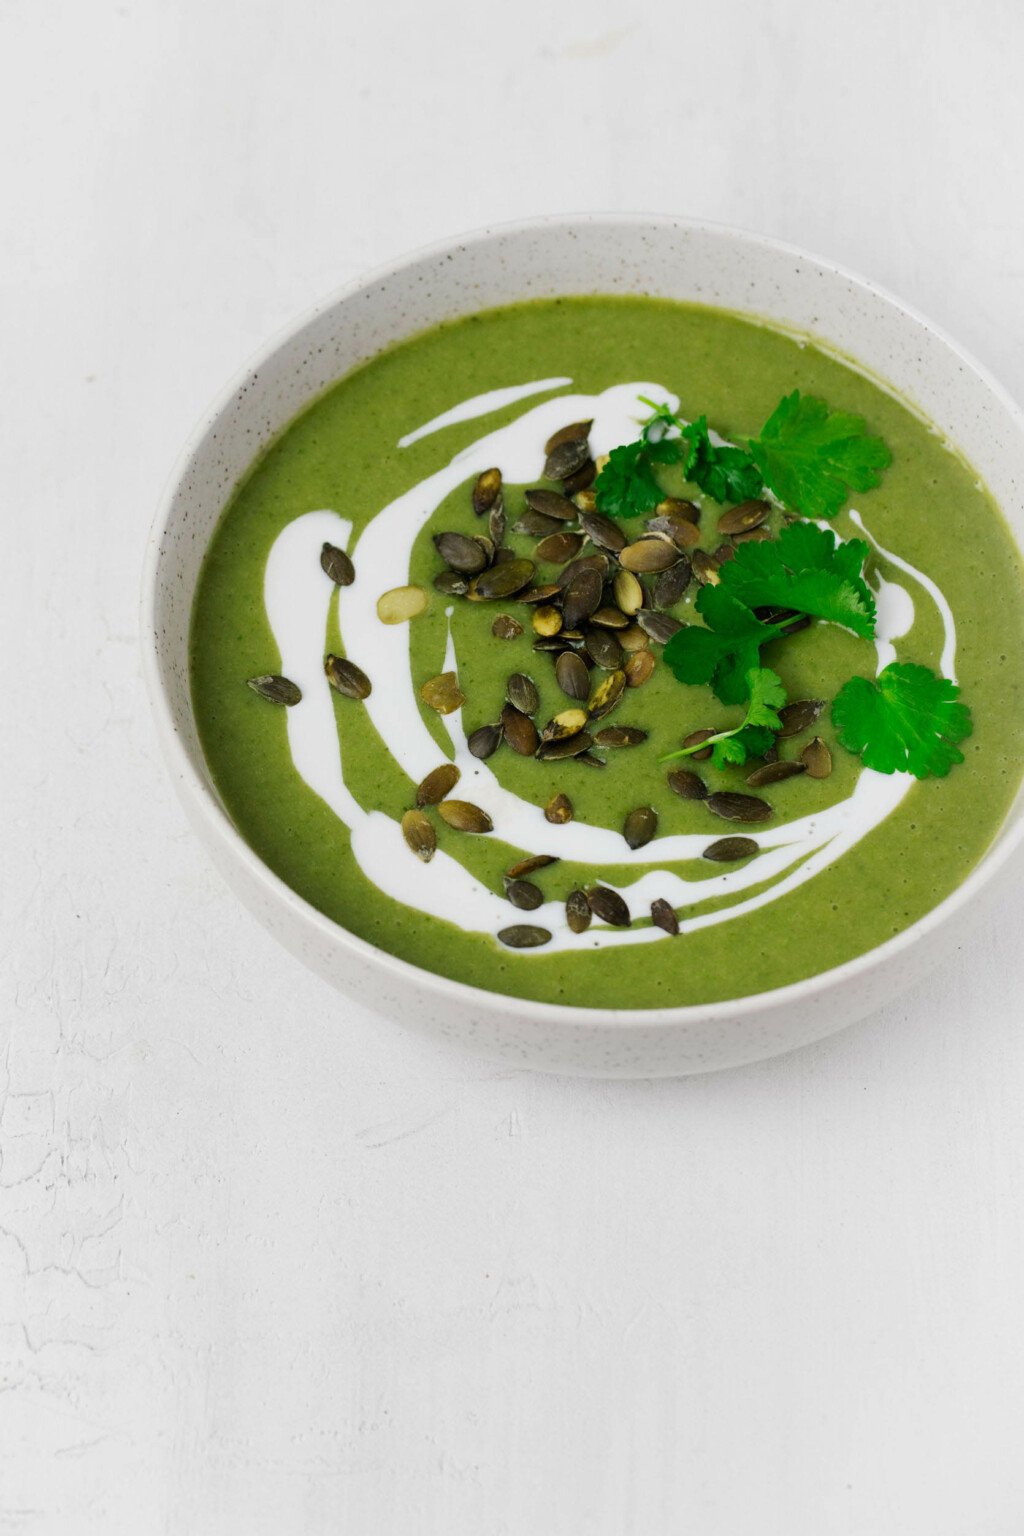 A bowl of soup, garnished with herbs and pepitas, is resting on a white surface.